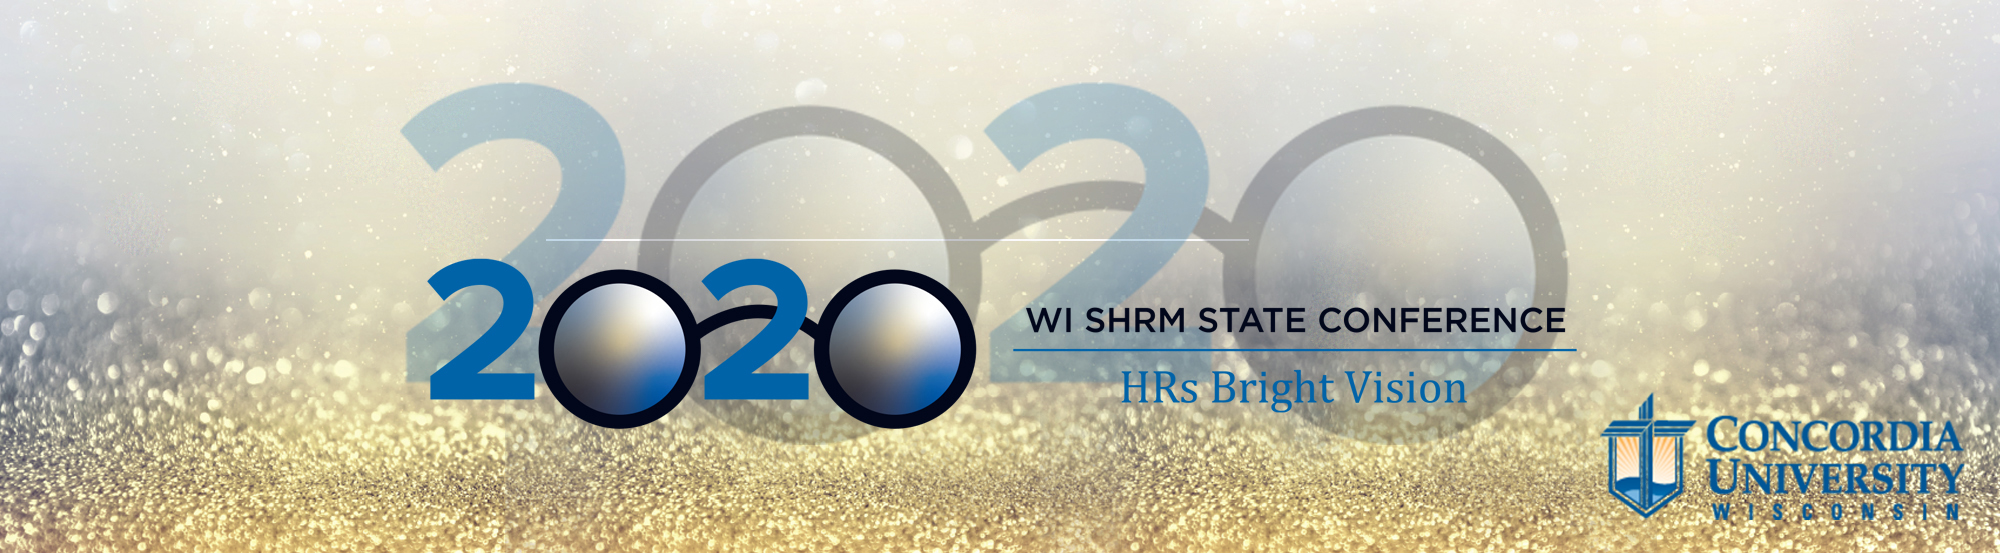 2020 Wisconsin SHRM State Conference, October 14-16, 2020